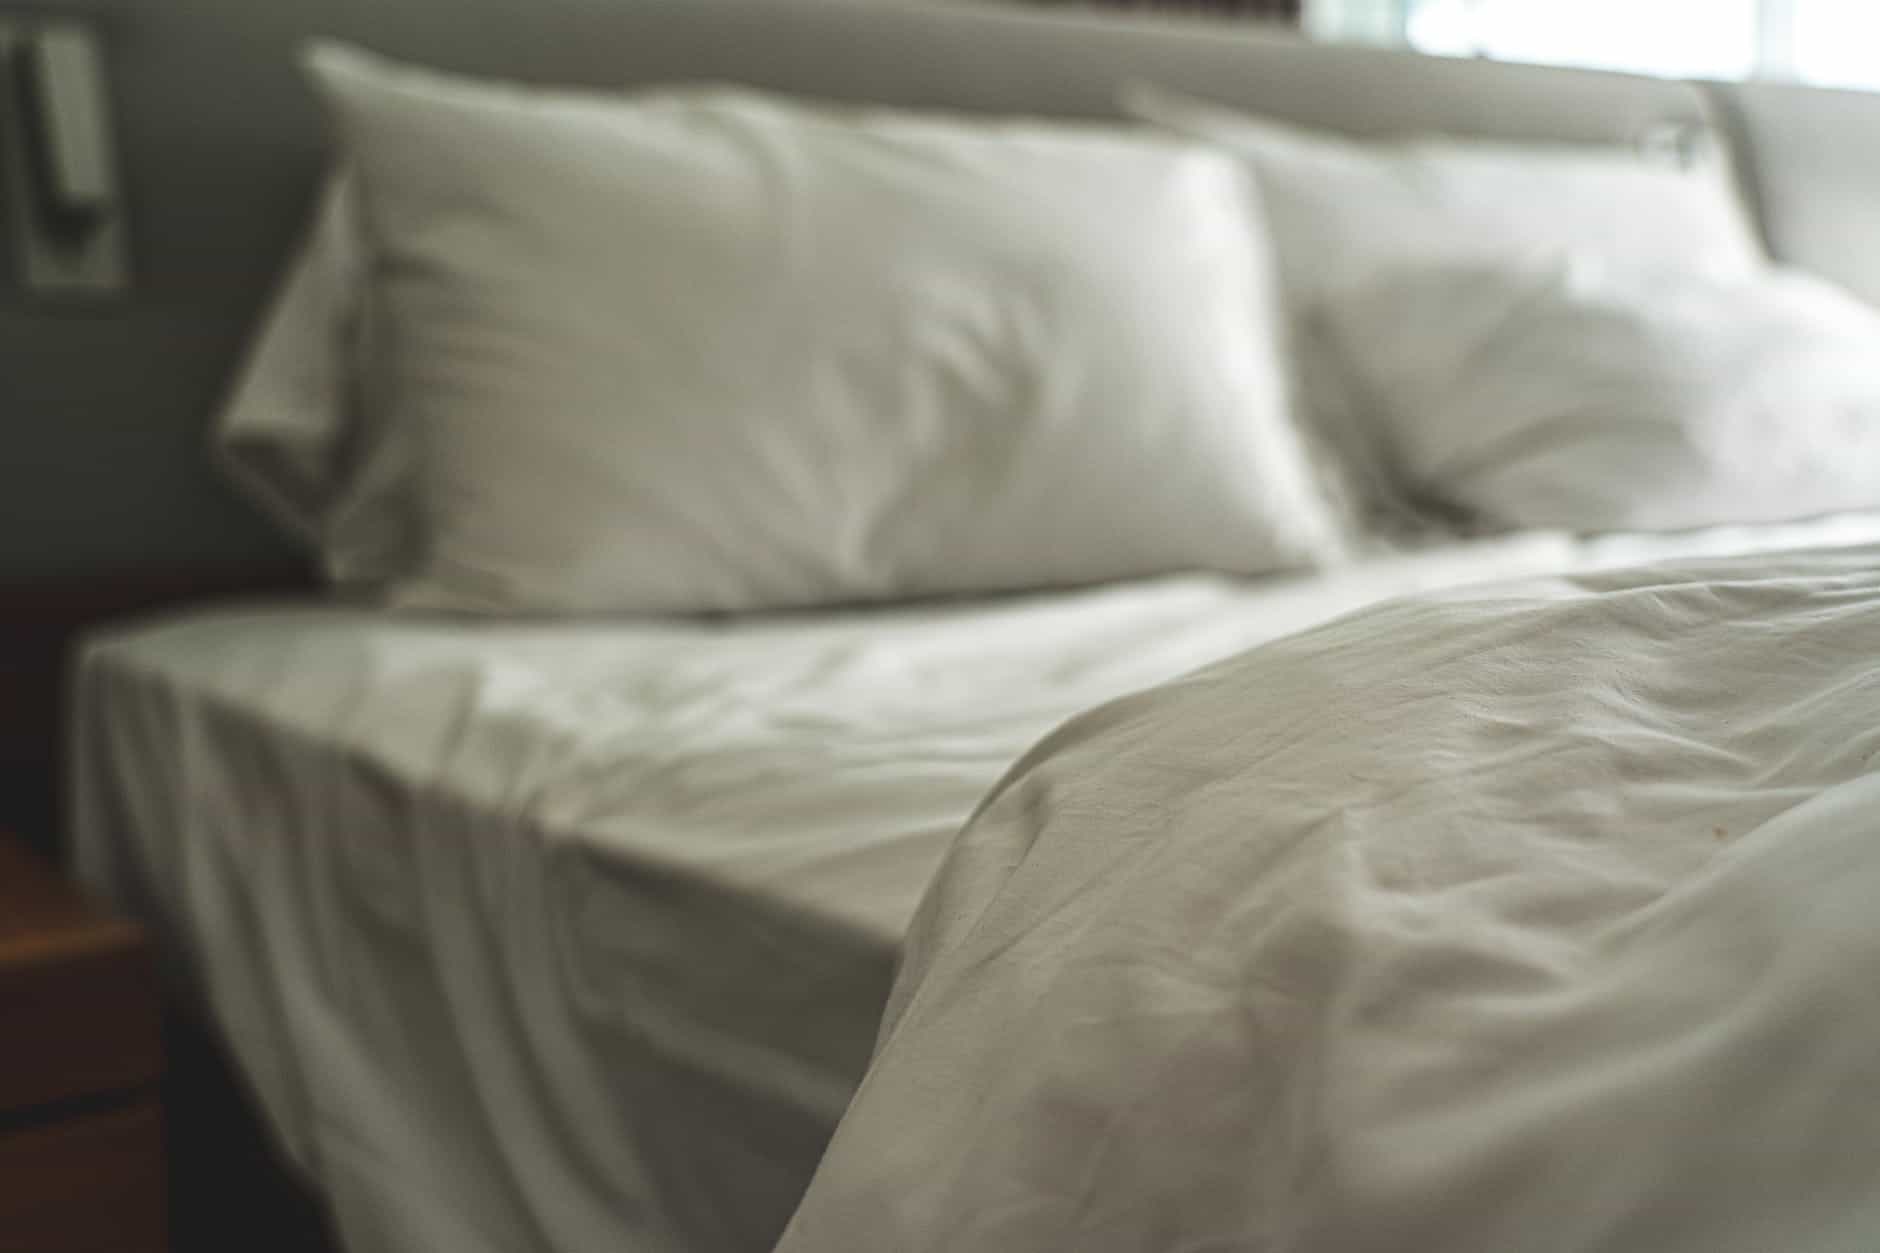 buy sheets that fit properly